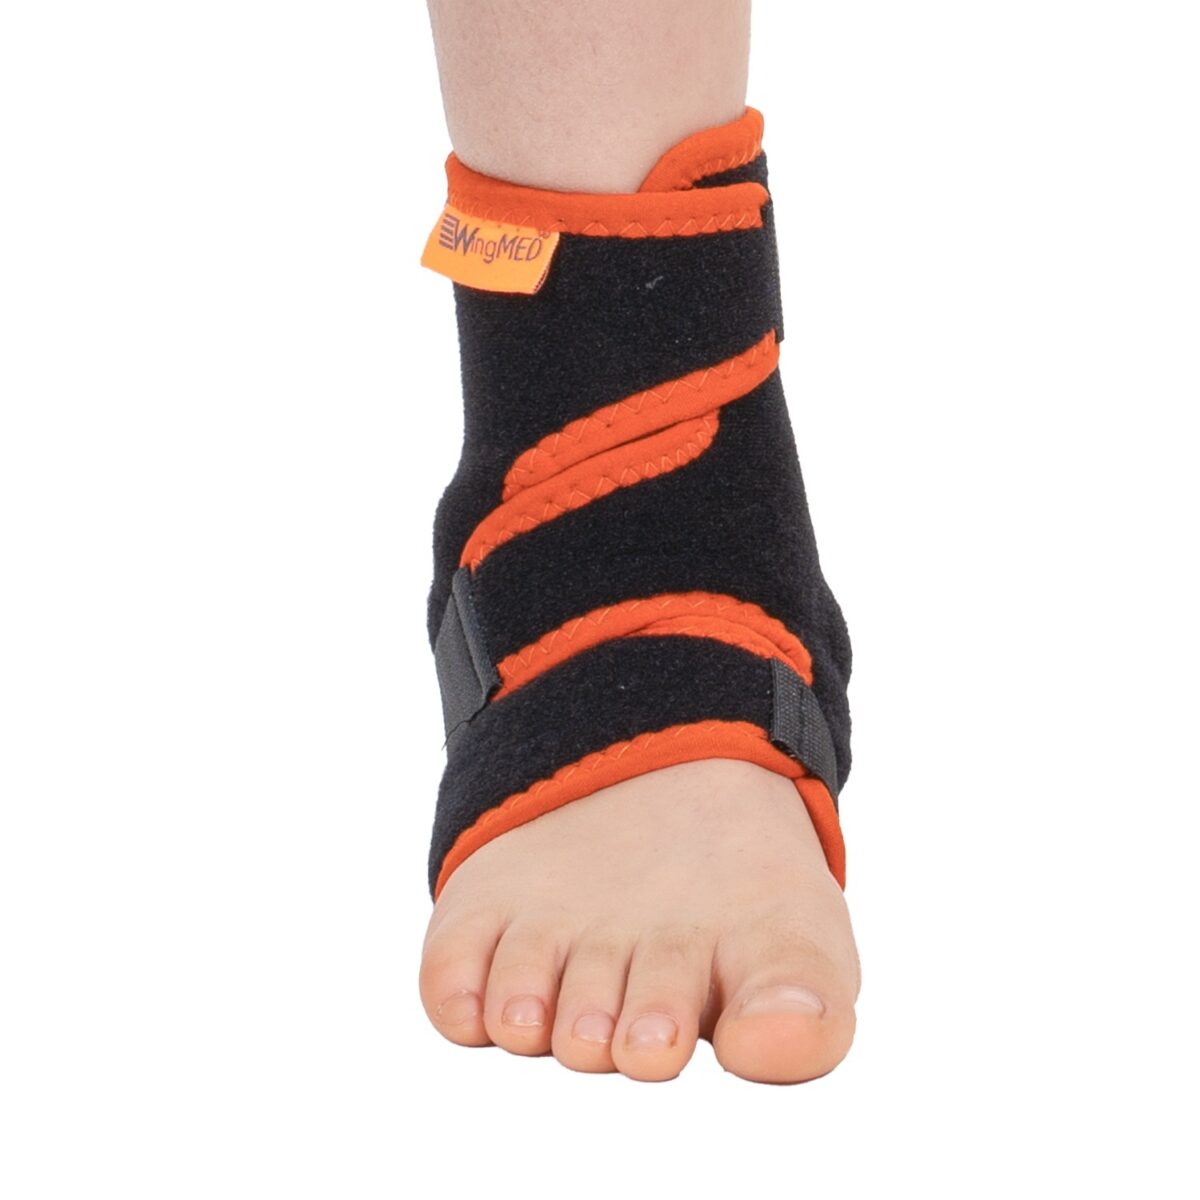 wingmed orthopedic equipments W921 malleol ankle support with 8 strap 26